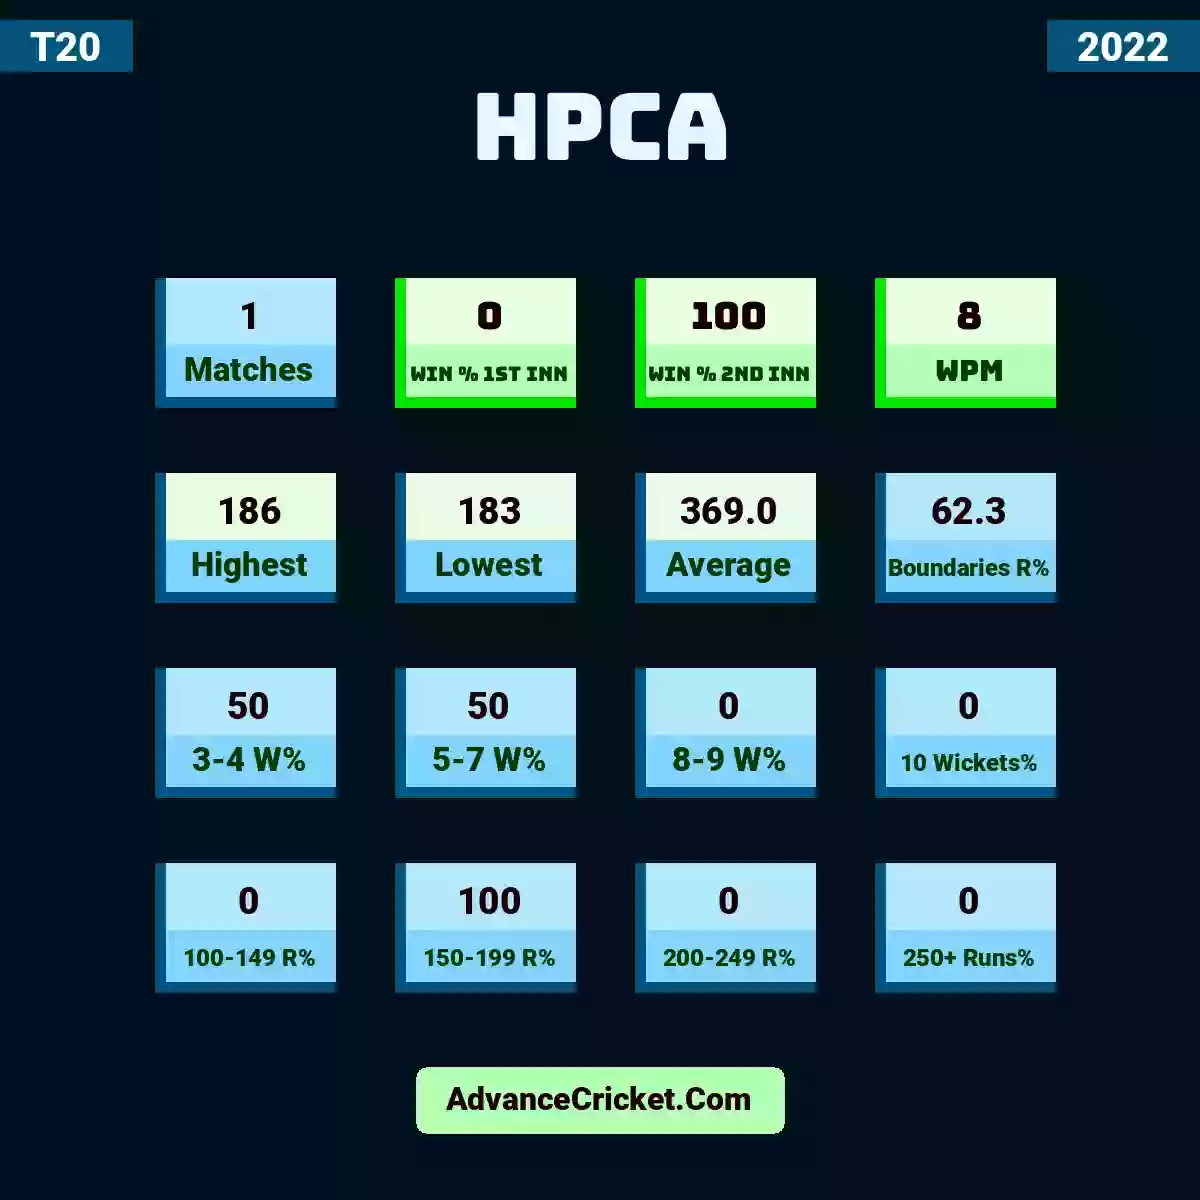 Image showing HPCA with Matches: 1, Win % 1st Inn: 0, Win % 2nd Inn: 100, WPM: 8, Highest: 186, Lowest: 183, Average: 369.0, Boundaries R%: 62.3, 3-4 W%: 50, 5-7 W%: 50, 8-9 W%: 0, 10 Wickets%: 0, 100-149 R%: 0, 150-199 R%: 100, 200-249 R%: 0, 250+ Runs%: 0.